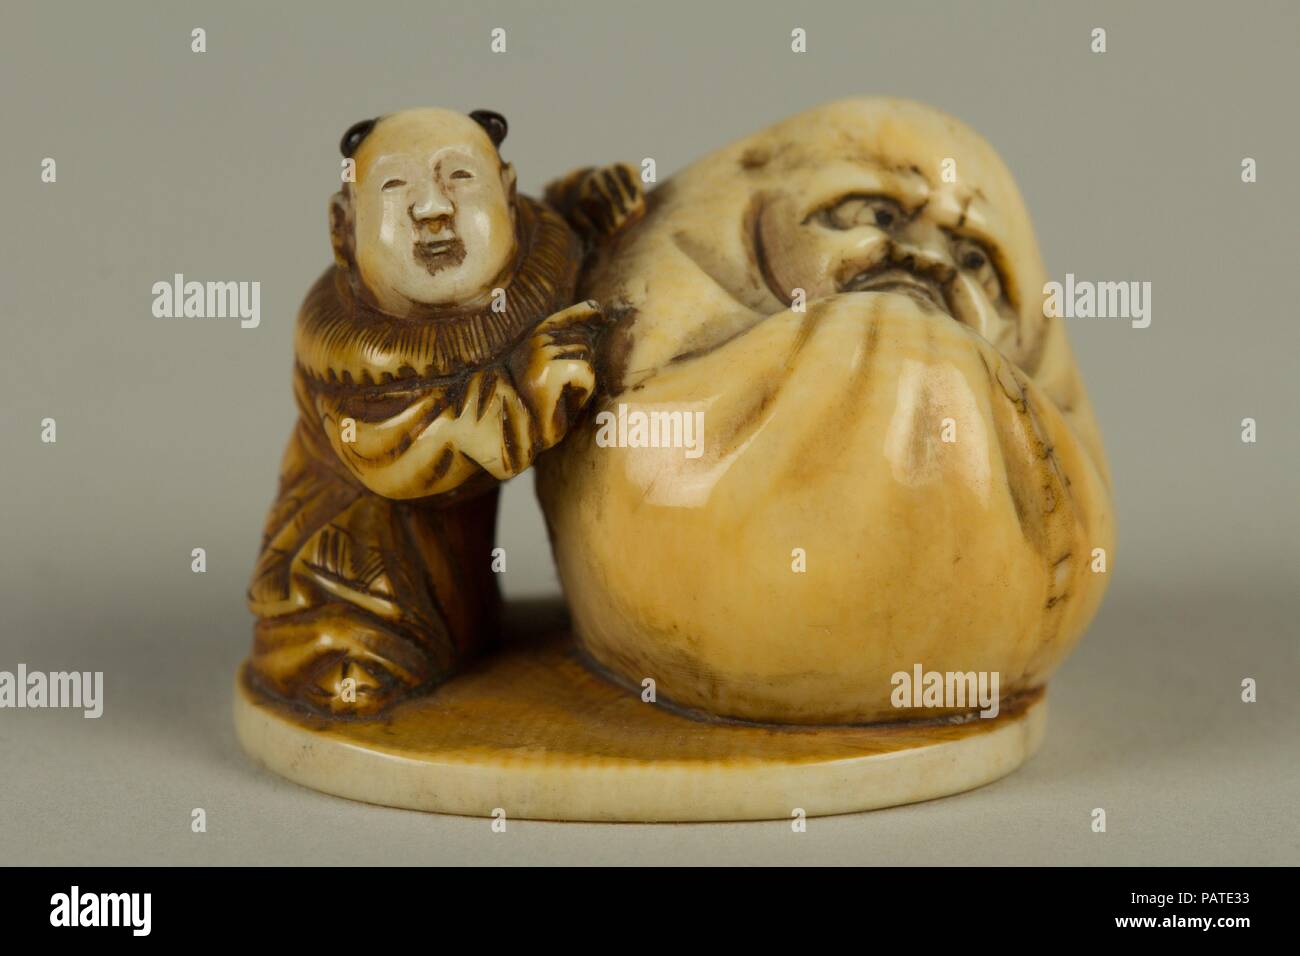 Netsuke of Dharma with a Small Boy. Culture: Japan. Dimensions: H. 1 1/8 in. (2.9 cm); W. 1 3/8 in. (3.5 cm); D. 1 in. (2.5 cm). Date: 19th century. Museum: Metropolitan Museum of Art, New York, USA. Stock Photo